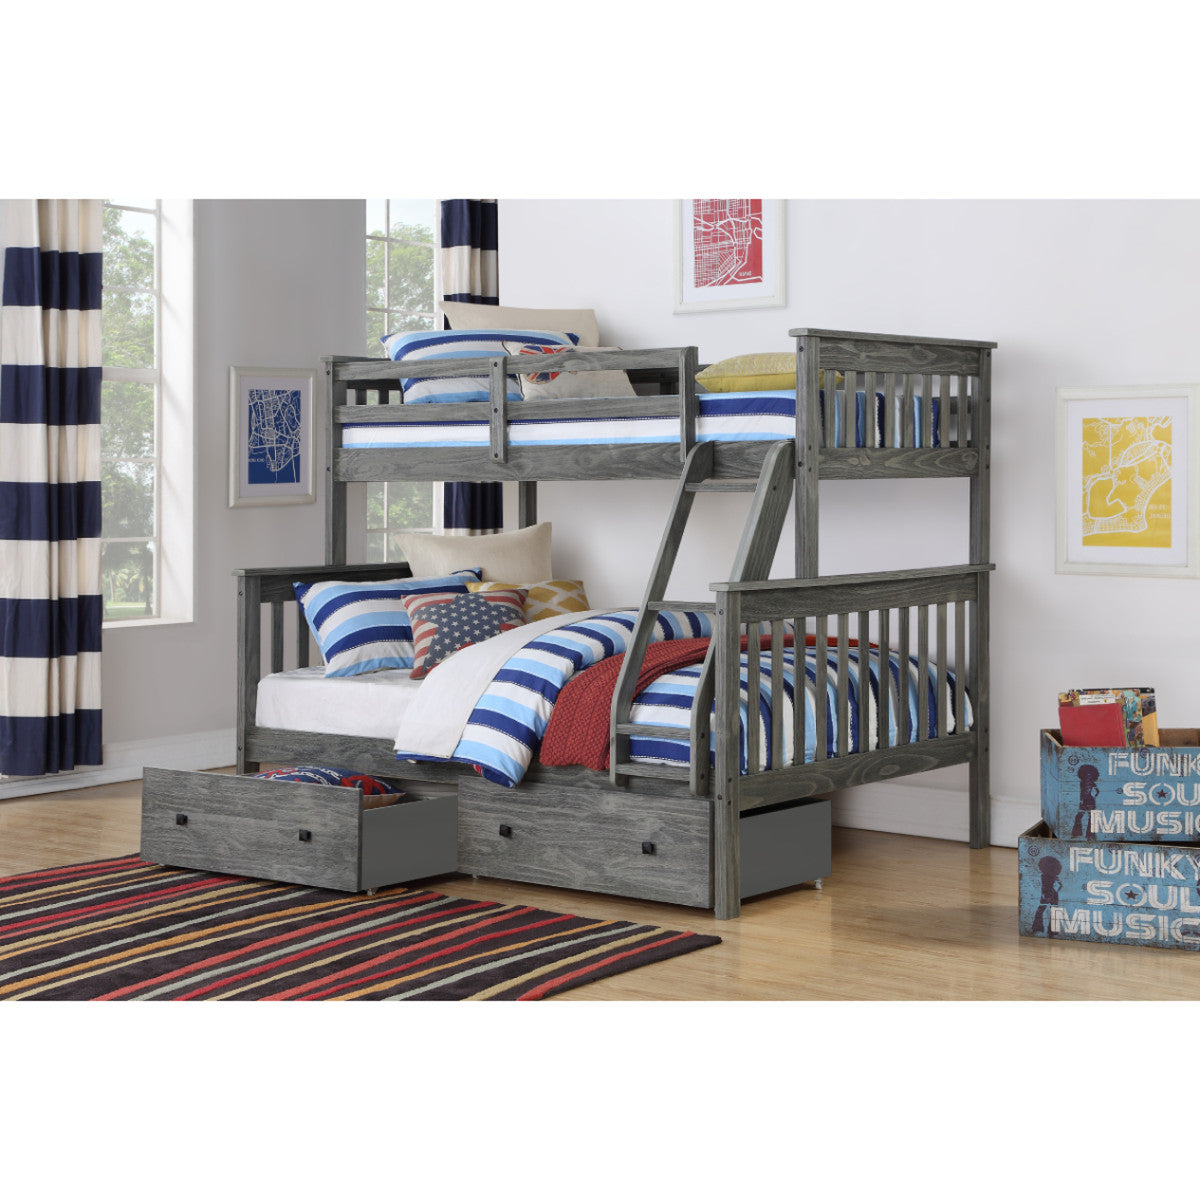 TWIN/FULL MISSION BUNK BED WITH DUAL UNDER BED DRAWERS IN BRUSHED GREY FINISH